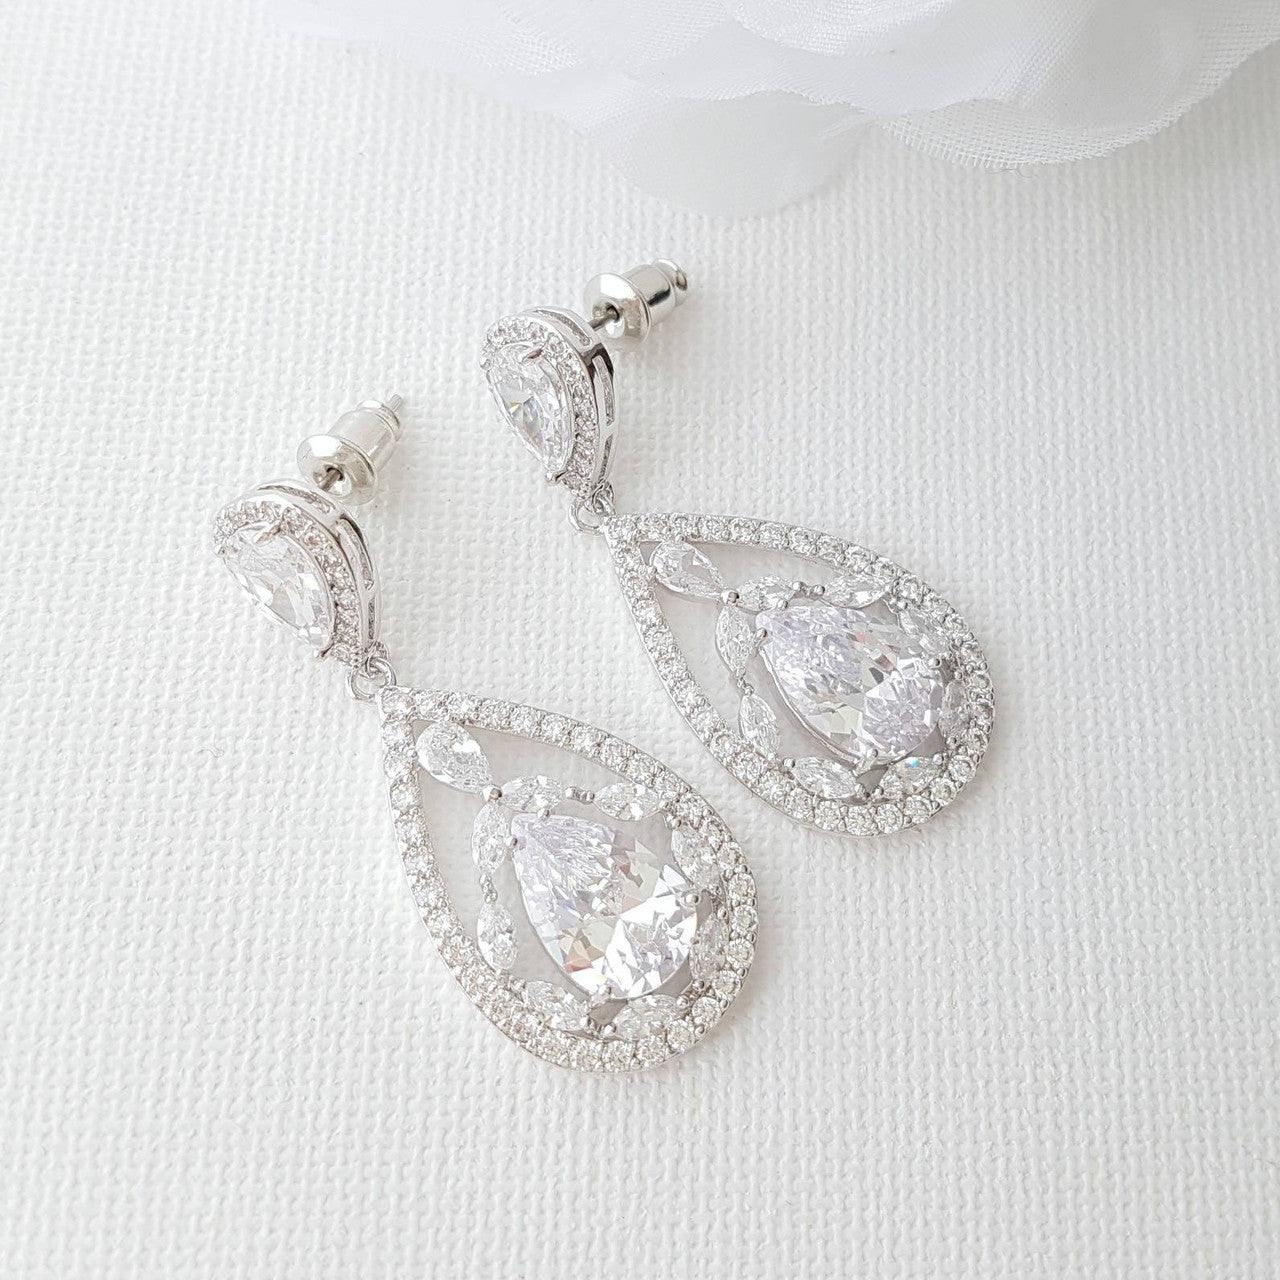 Gold Plated Drop Earrings for Wedding-Esther